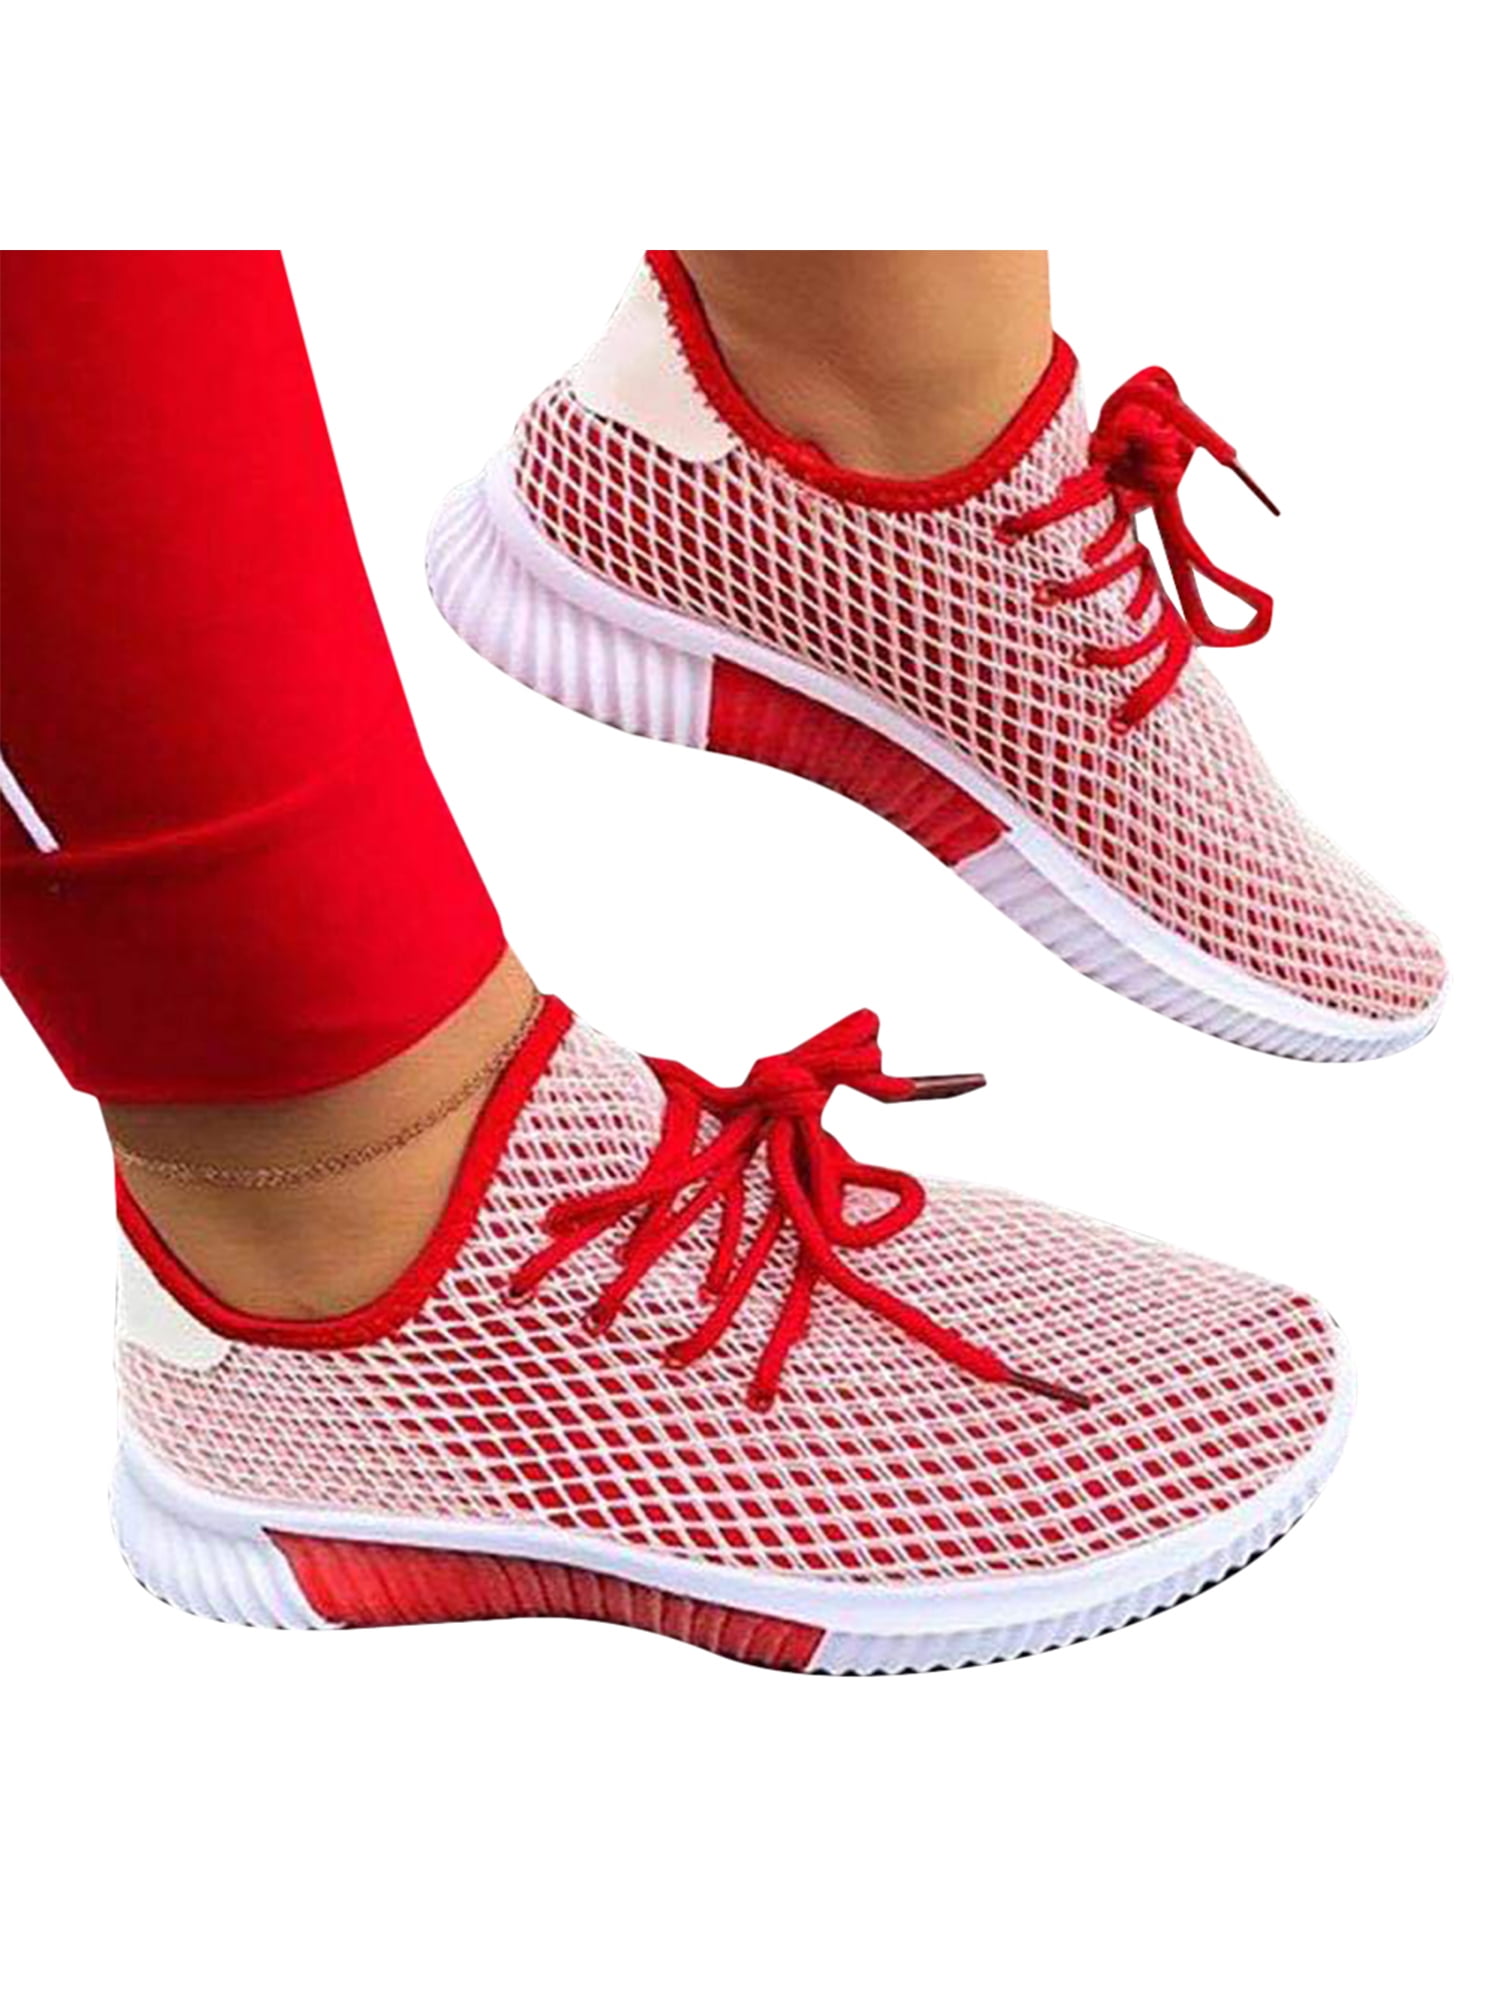 Ladies Womens Celebrity Gym Jogging Running Sports Lace Trainers Flat Shoes Size 